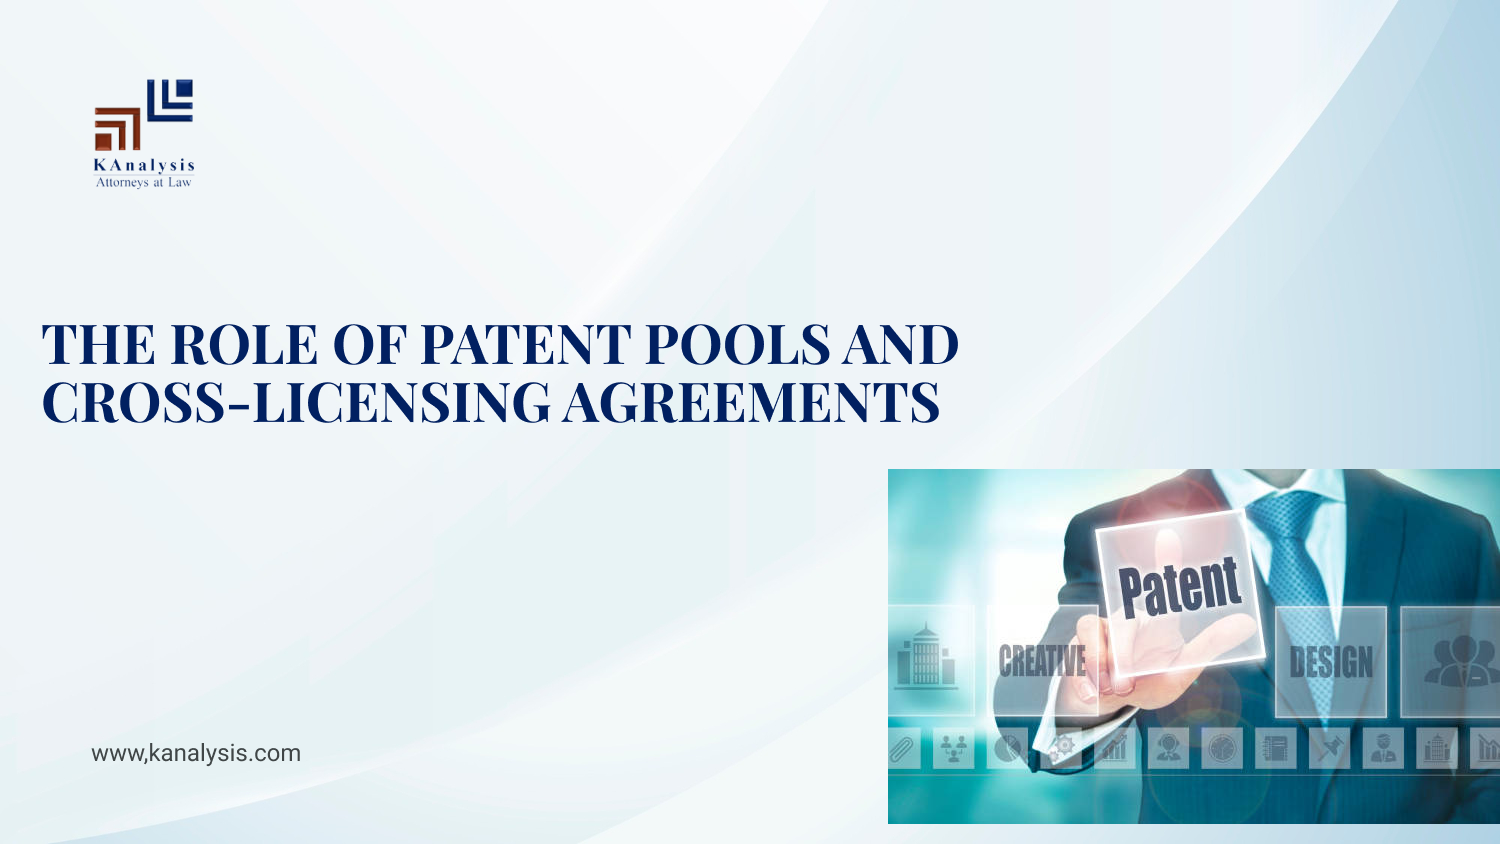 You are currently viewing THE ROLE OF PATENT POOLS AND CROSS-LICENSING AGREEMENTS